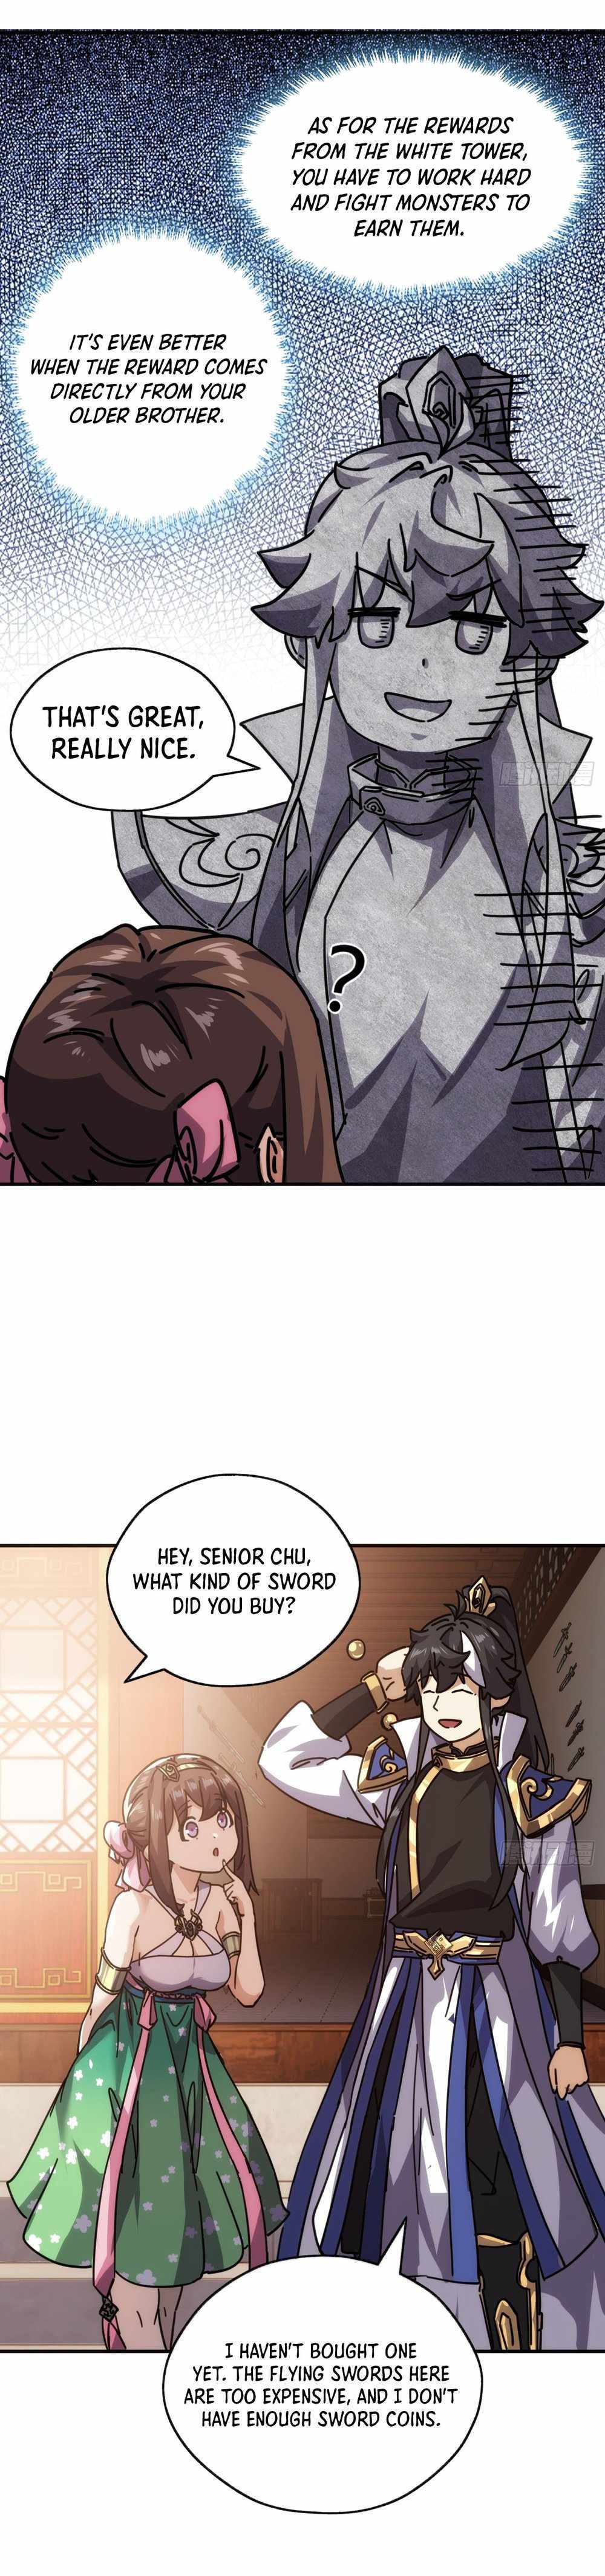 Please Slay The Demon! Young Master! - Page 3